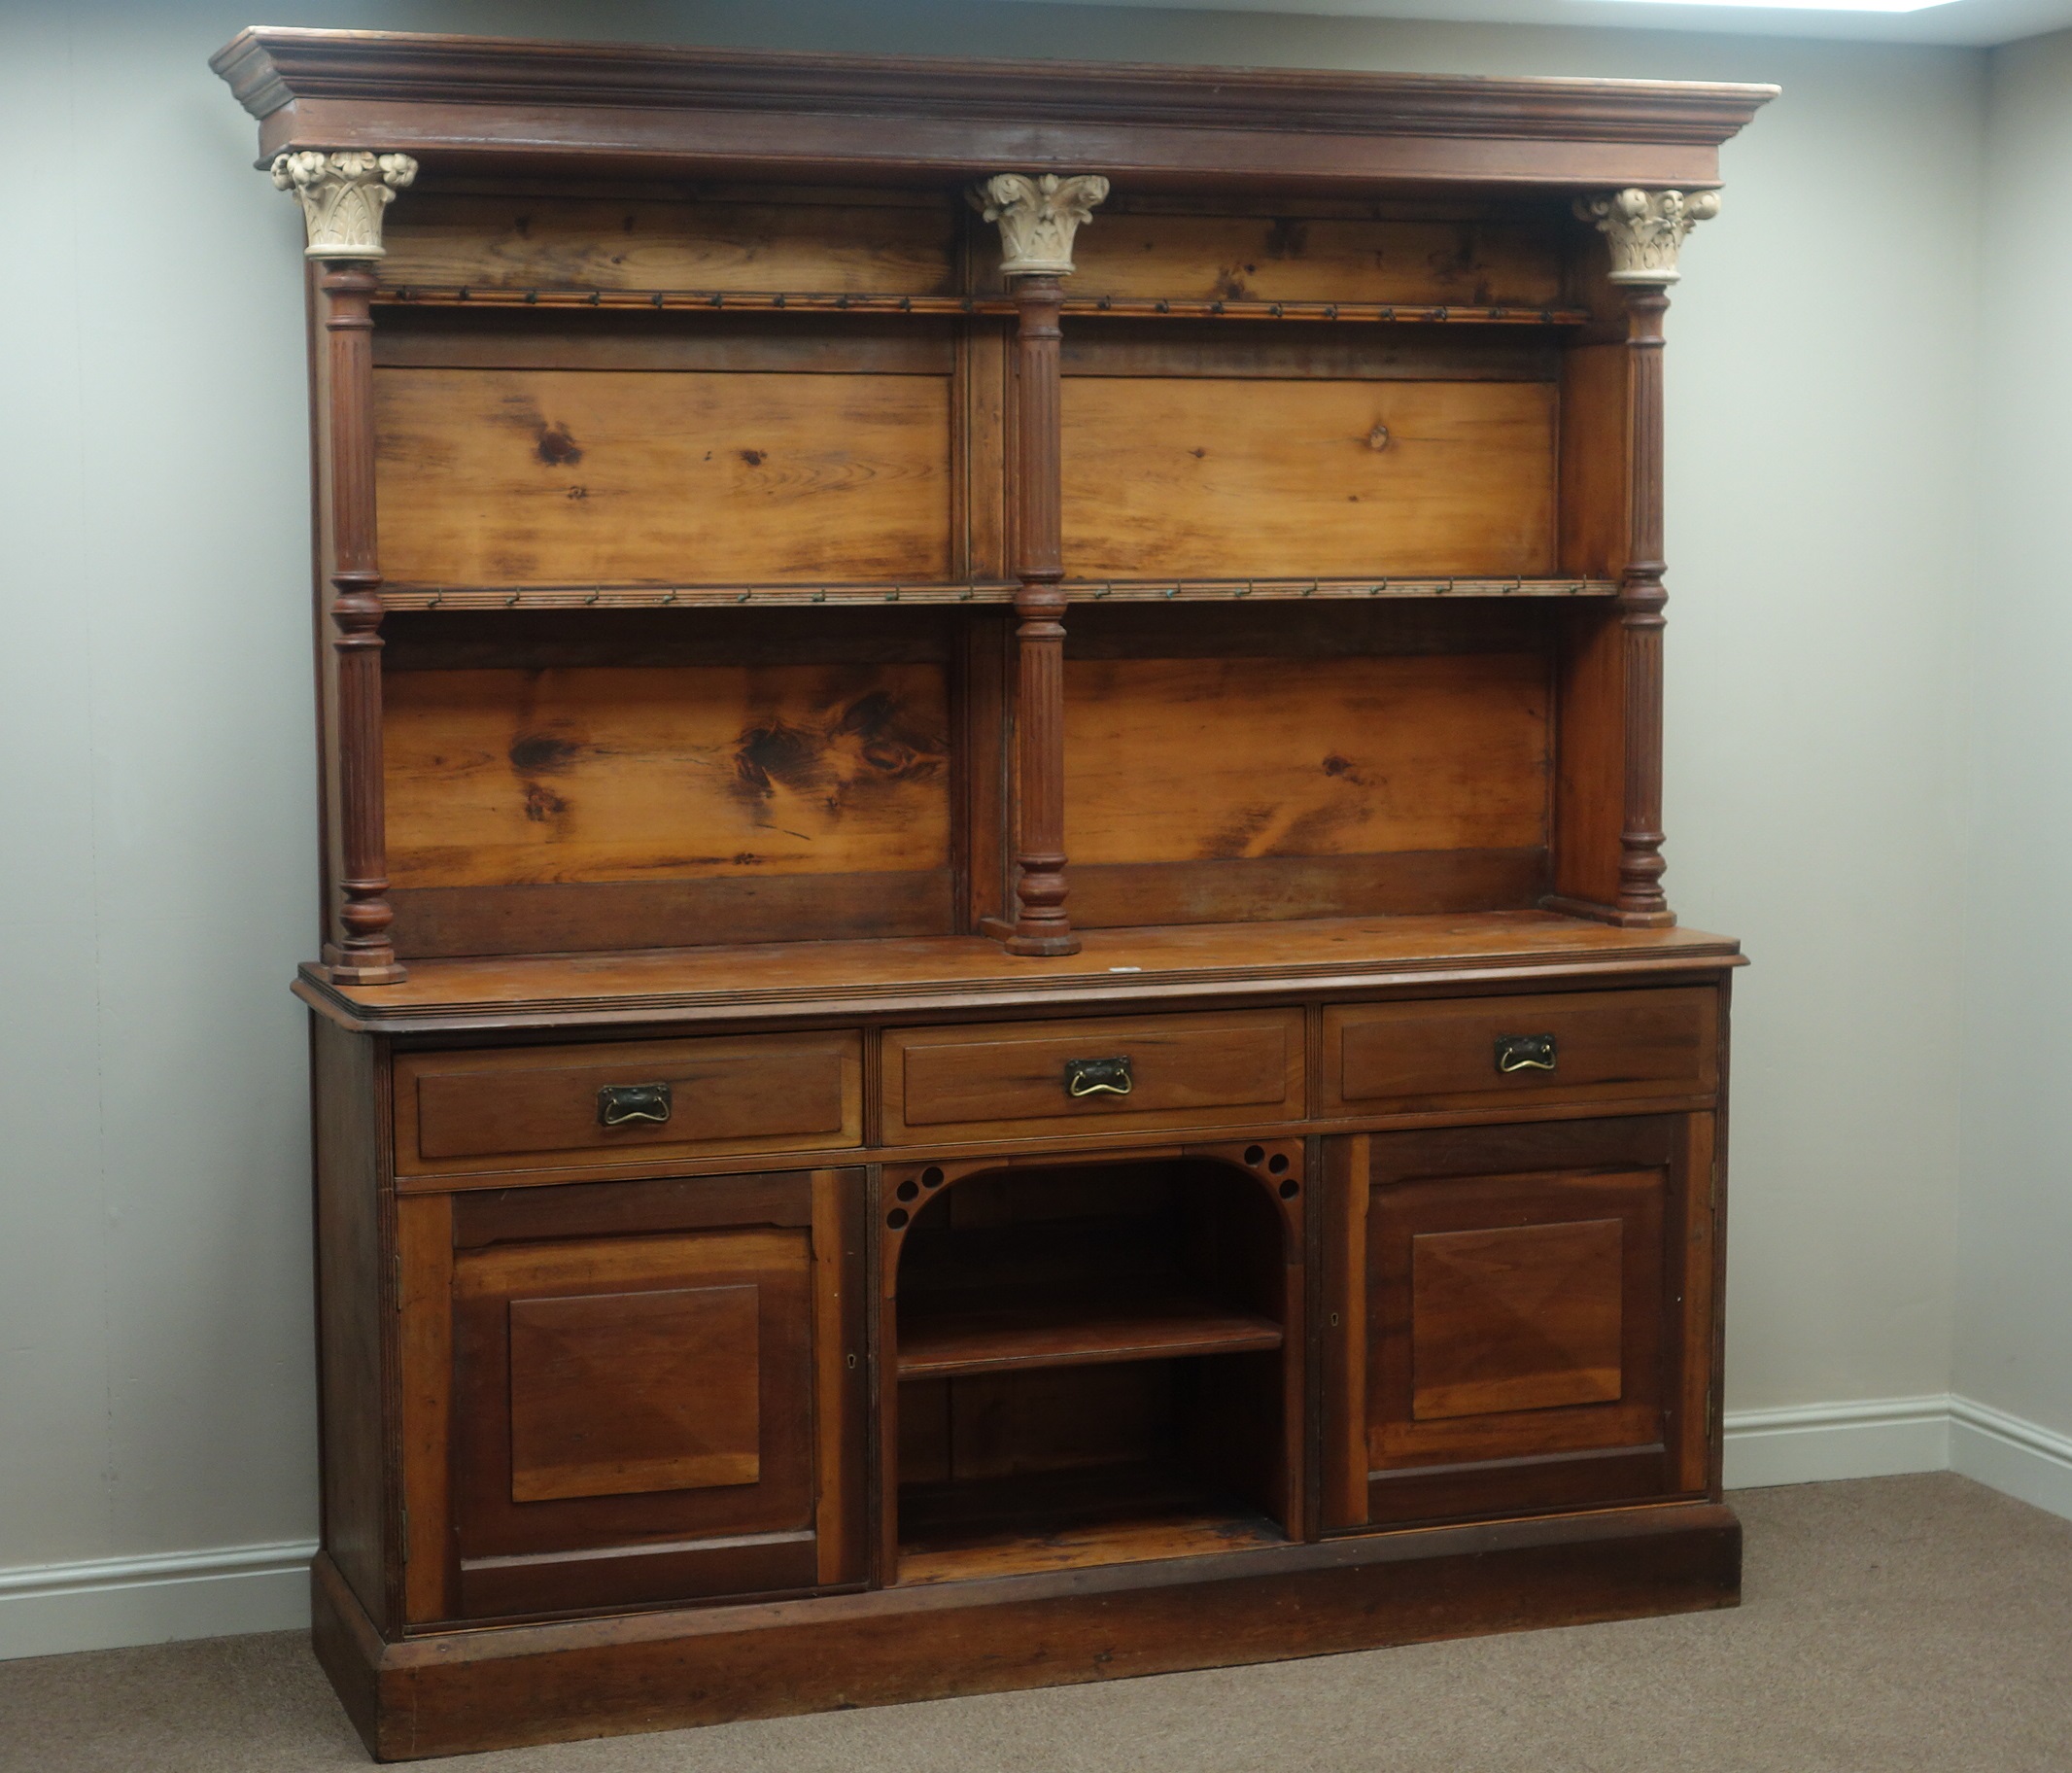 Large late 19th century walnut and pine dresser with plate rack,